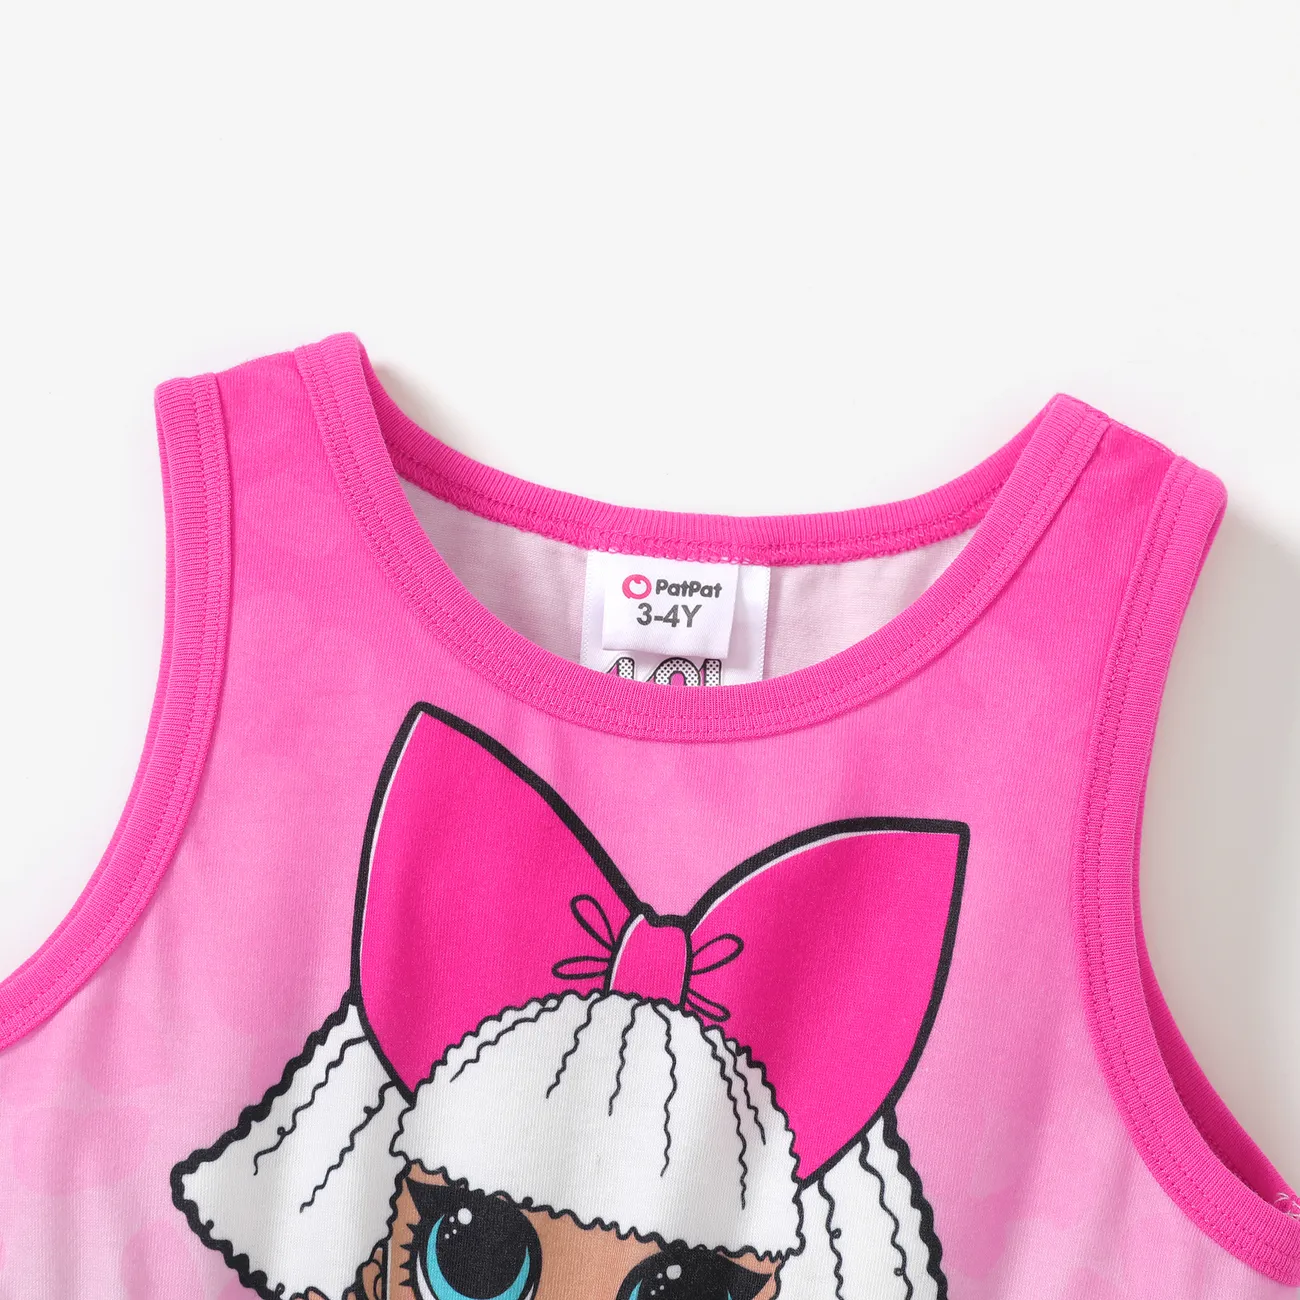 L.O.L. SURPRISE! Toddler/Kid Girls 1pc Web Gradient Pattern Sleeveless Checkerboard All-over Pattern Dress PINK-1 big image 1